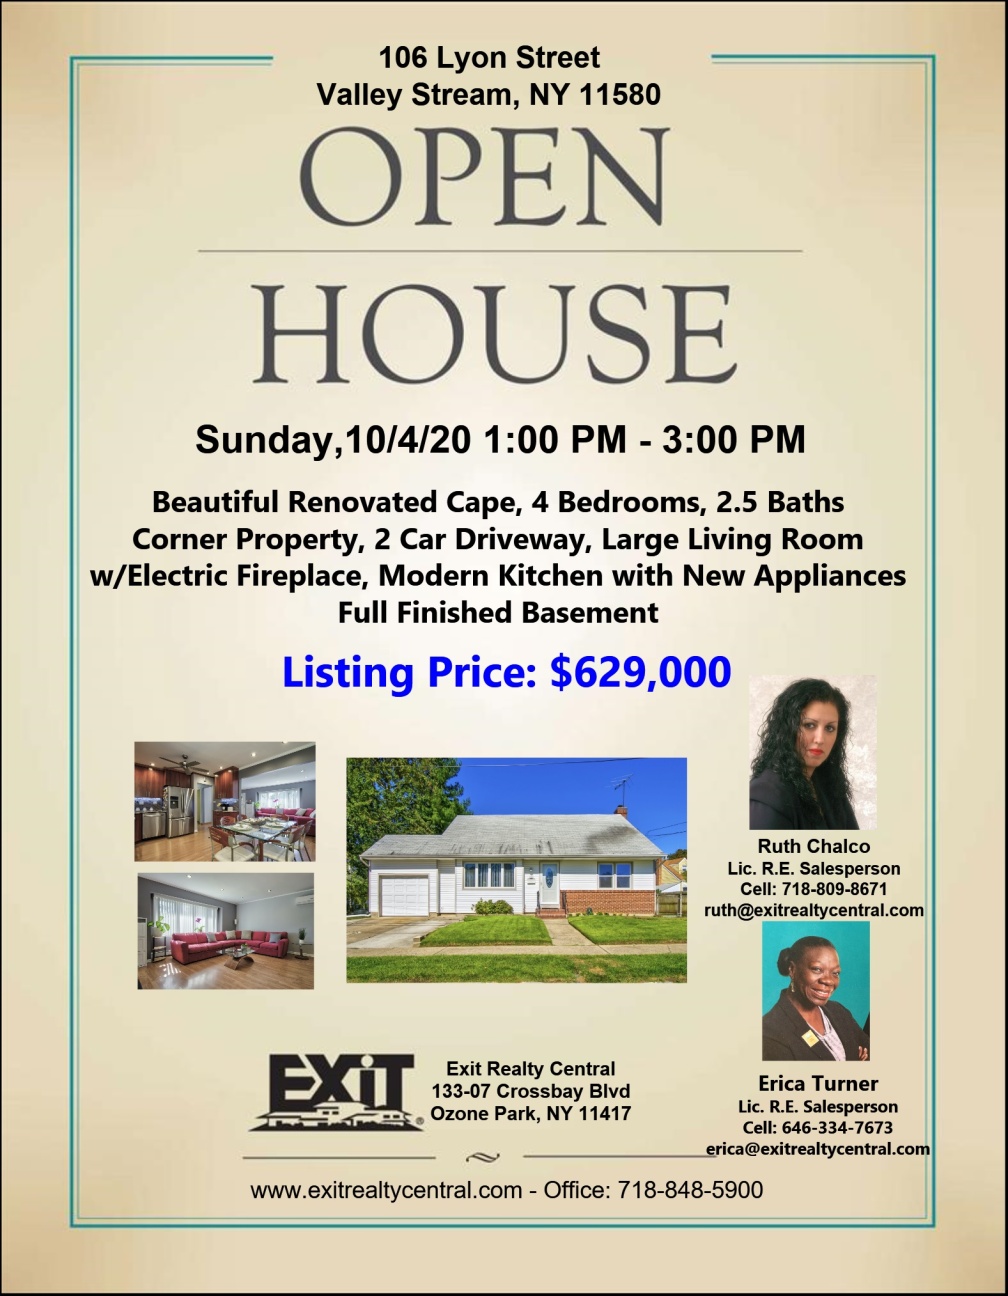 Open House in Valley Stream 10/4 1-3pm